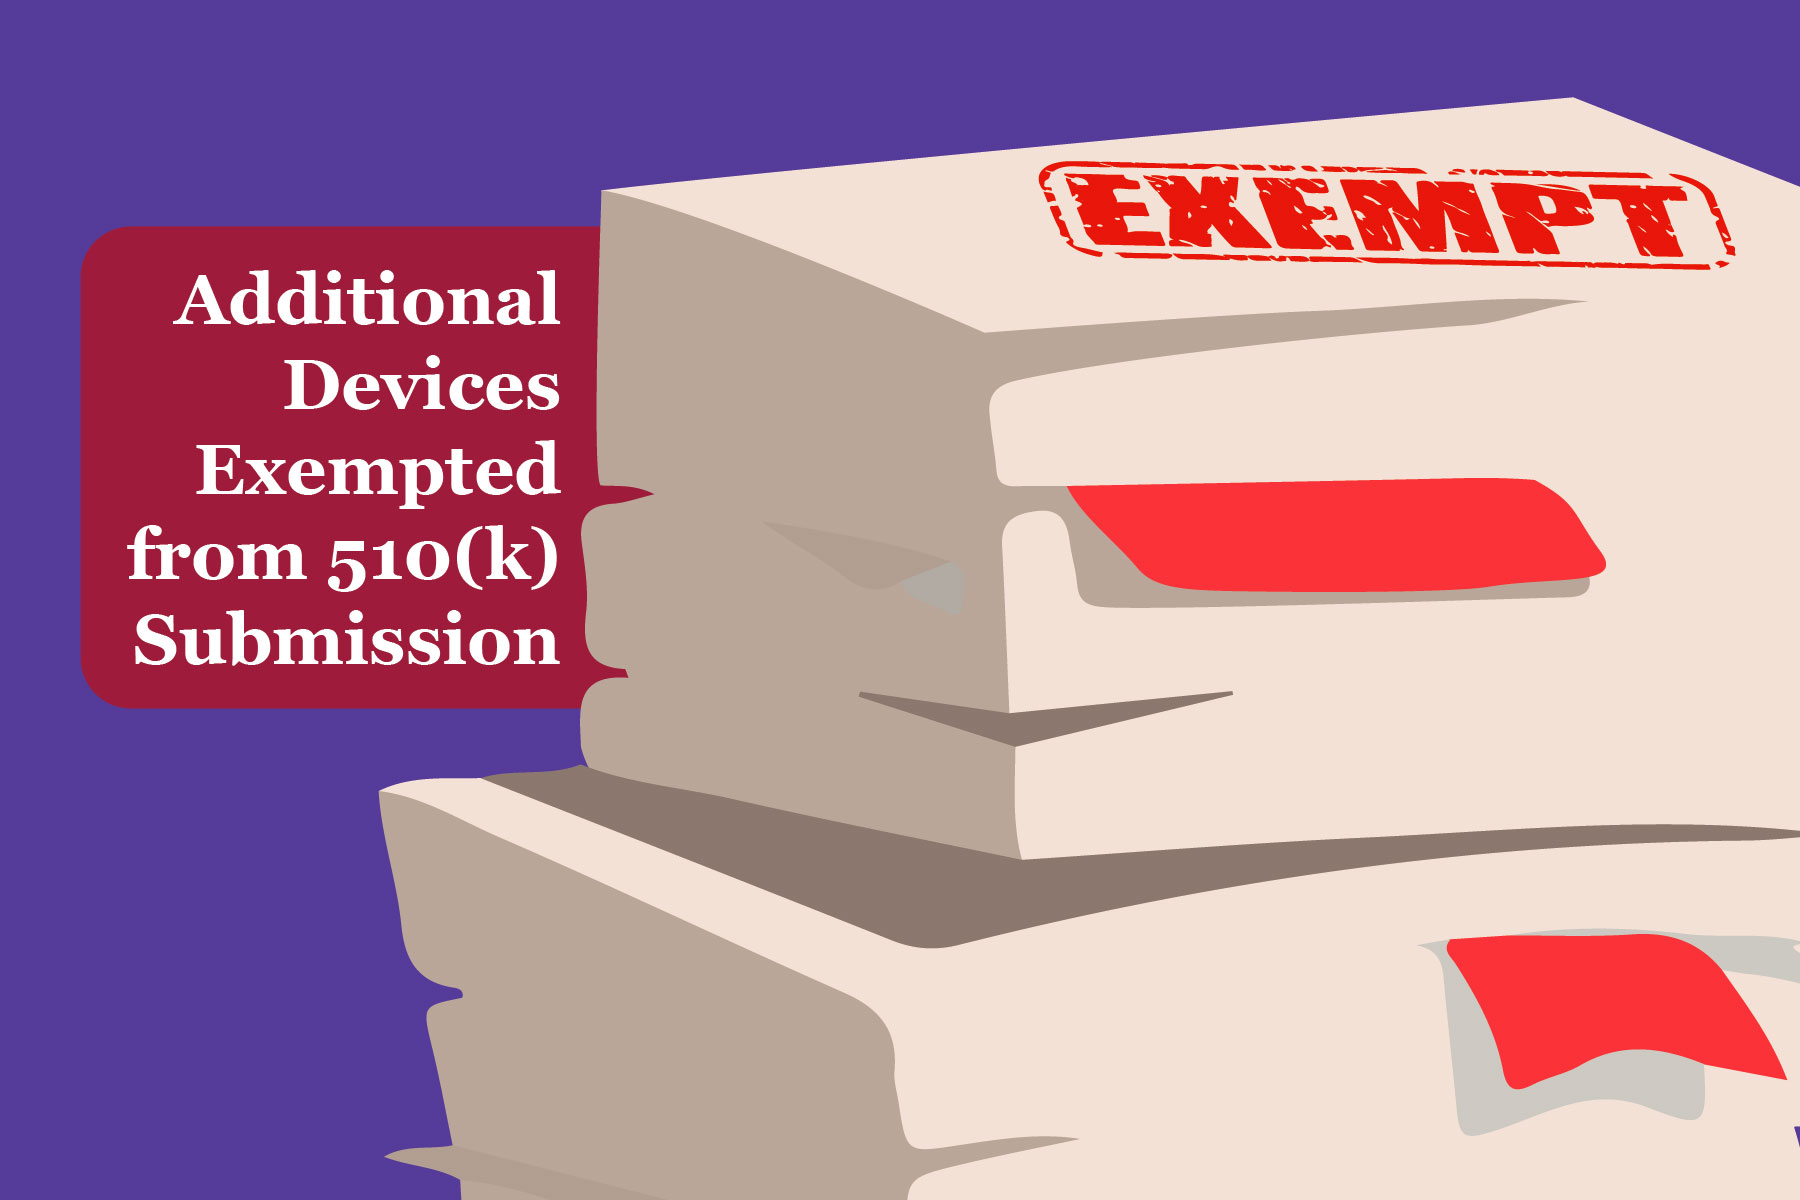 Additional Devices Exempted from 510(k) Submission